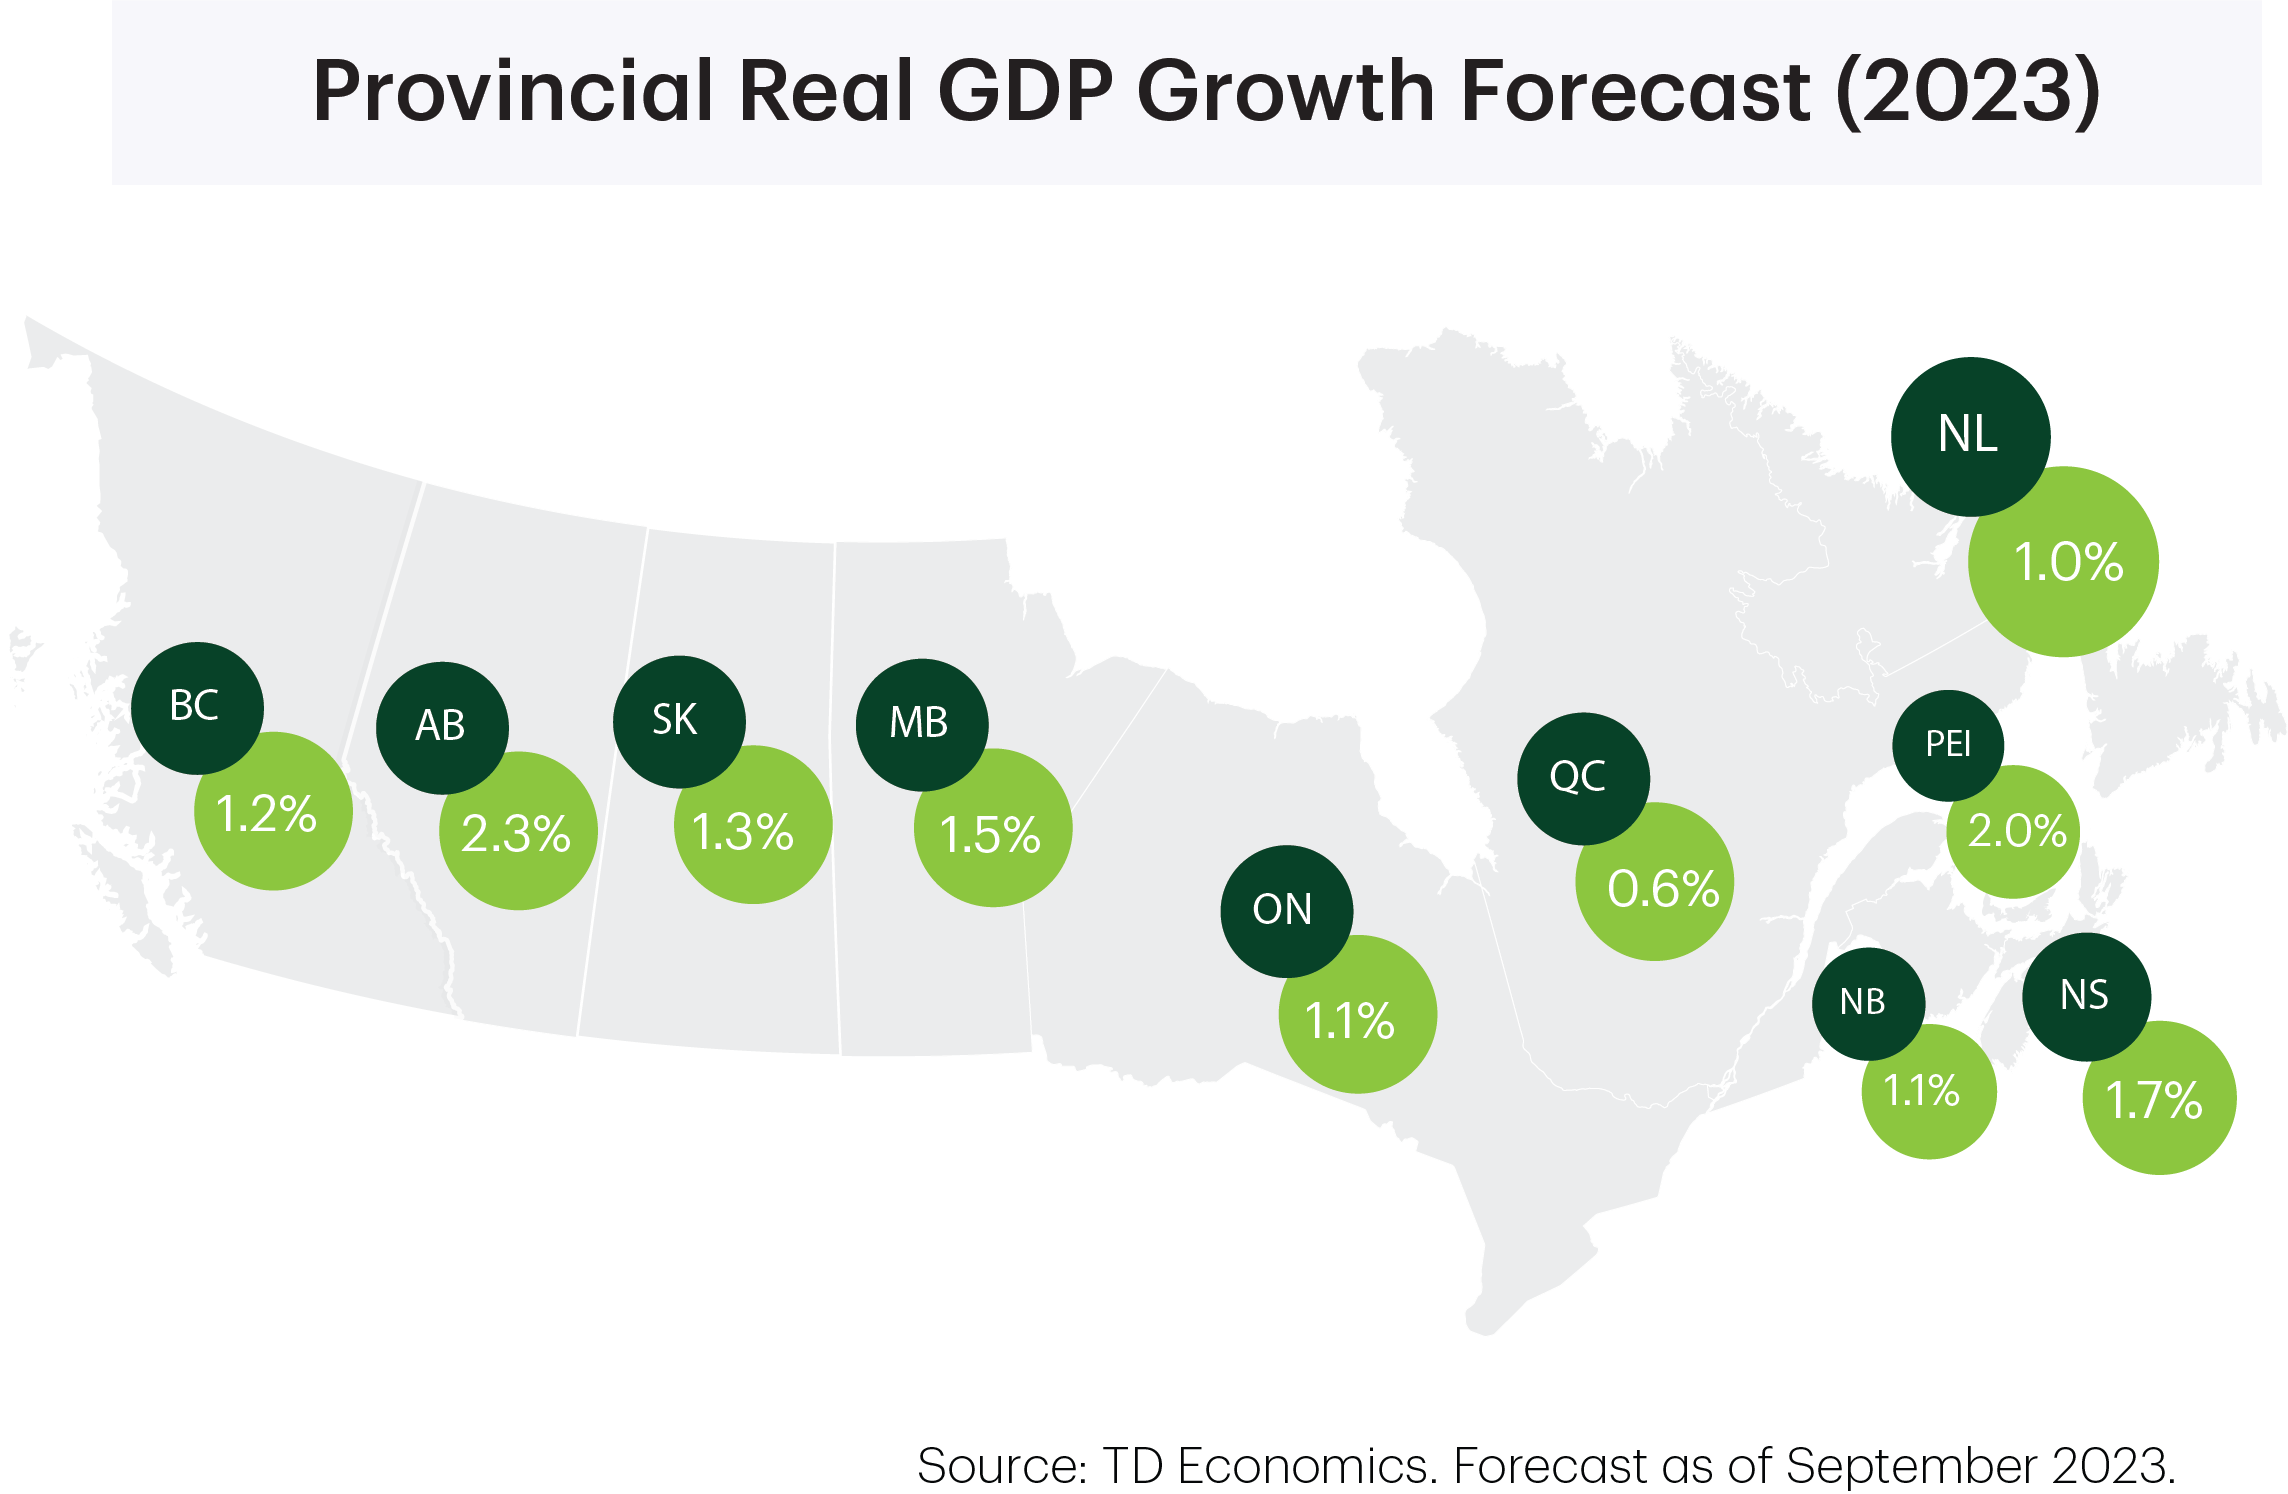 Provincial Real GDP Growth Forecast (September 2023)
        BC: 1.2%
        AB: 2.3%
        SK: 1.3%
        MB: 1.5%
        ON: 1.1%
        QC: 0.6%
        NB: 1.1%
        NS: 1.7%
        PEI: 2.0%
        NF: 1.0%
        